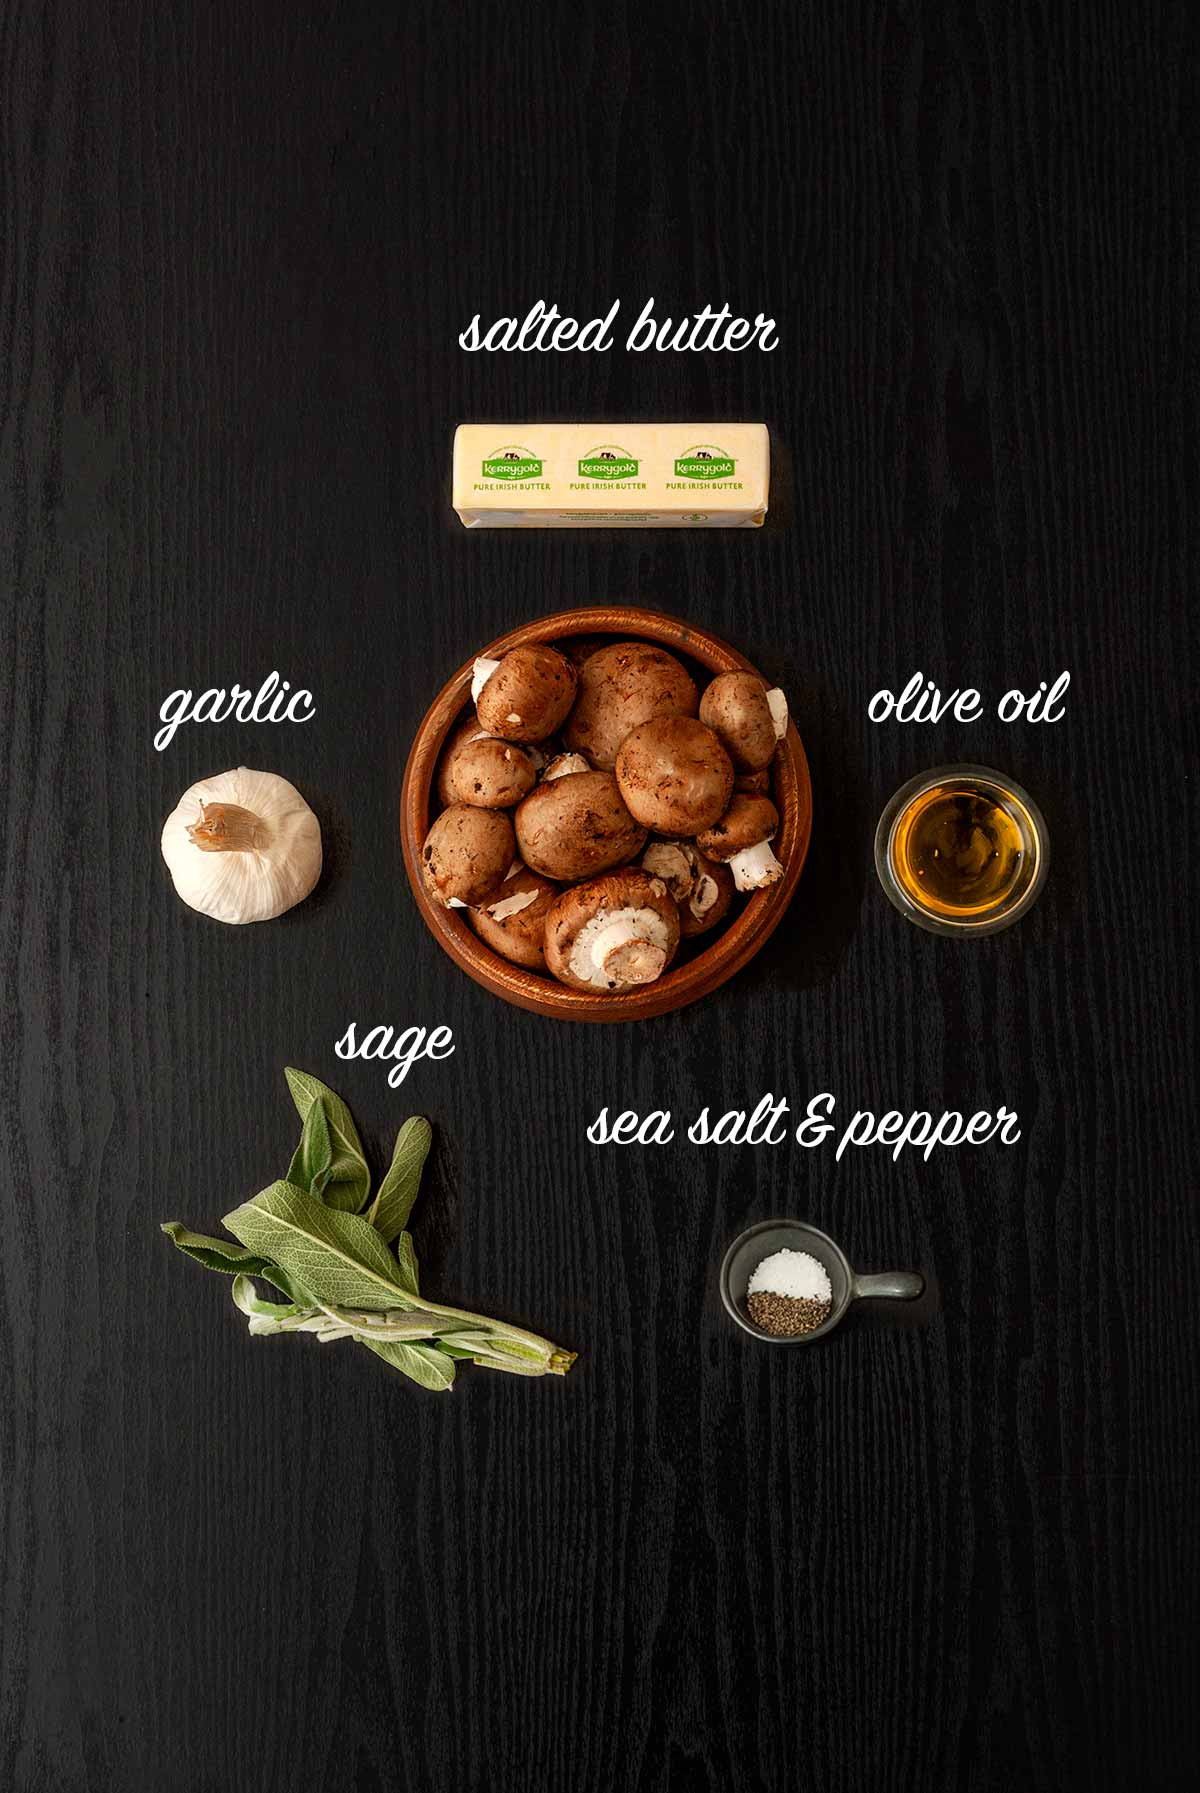 6 ingredients with labels describing what they are.